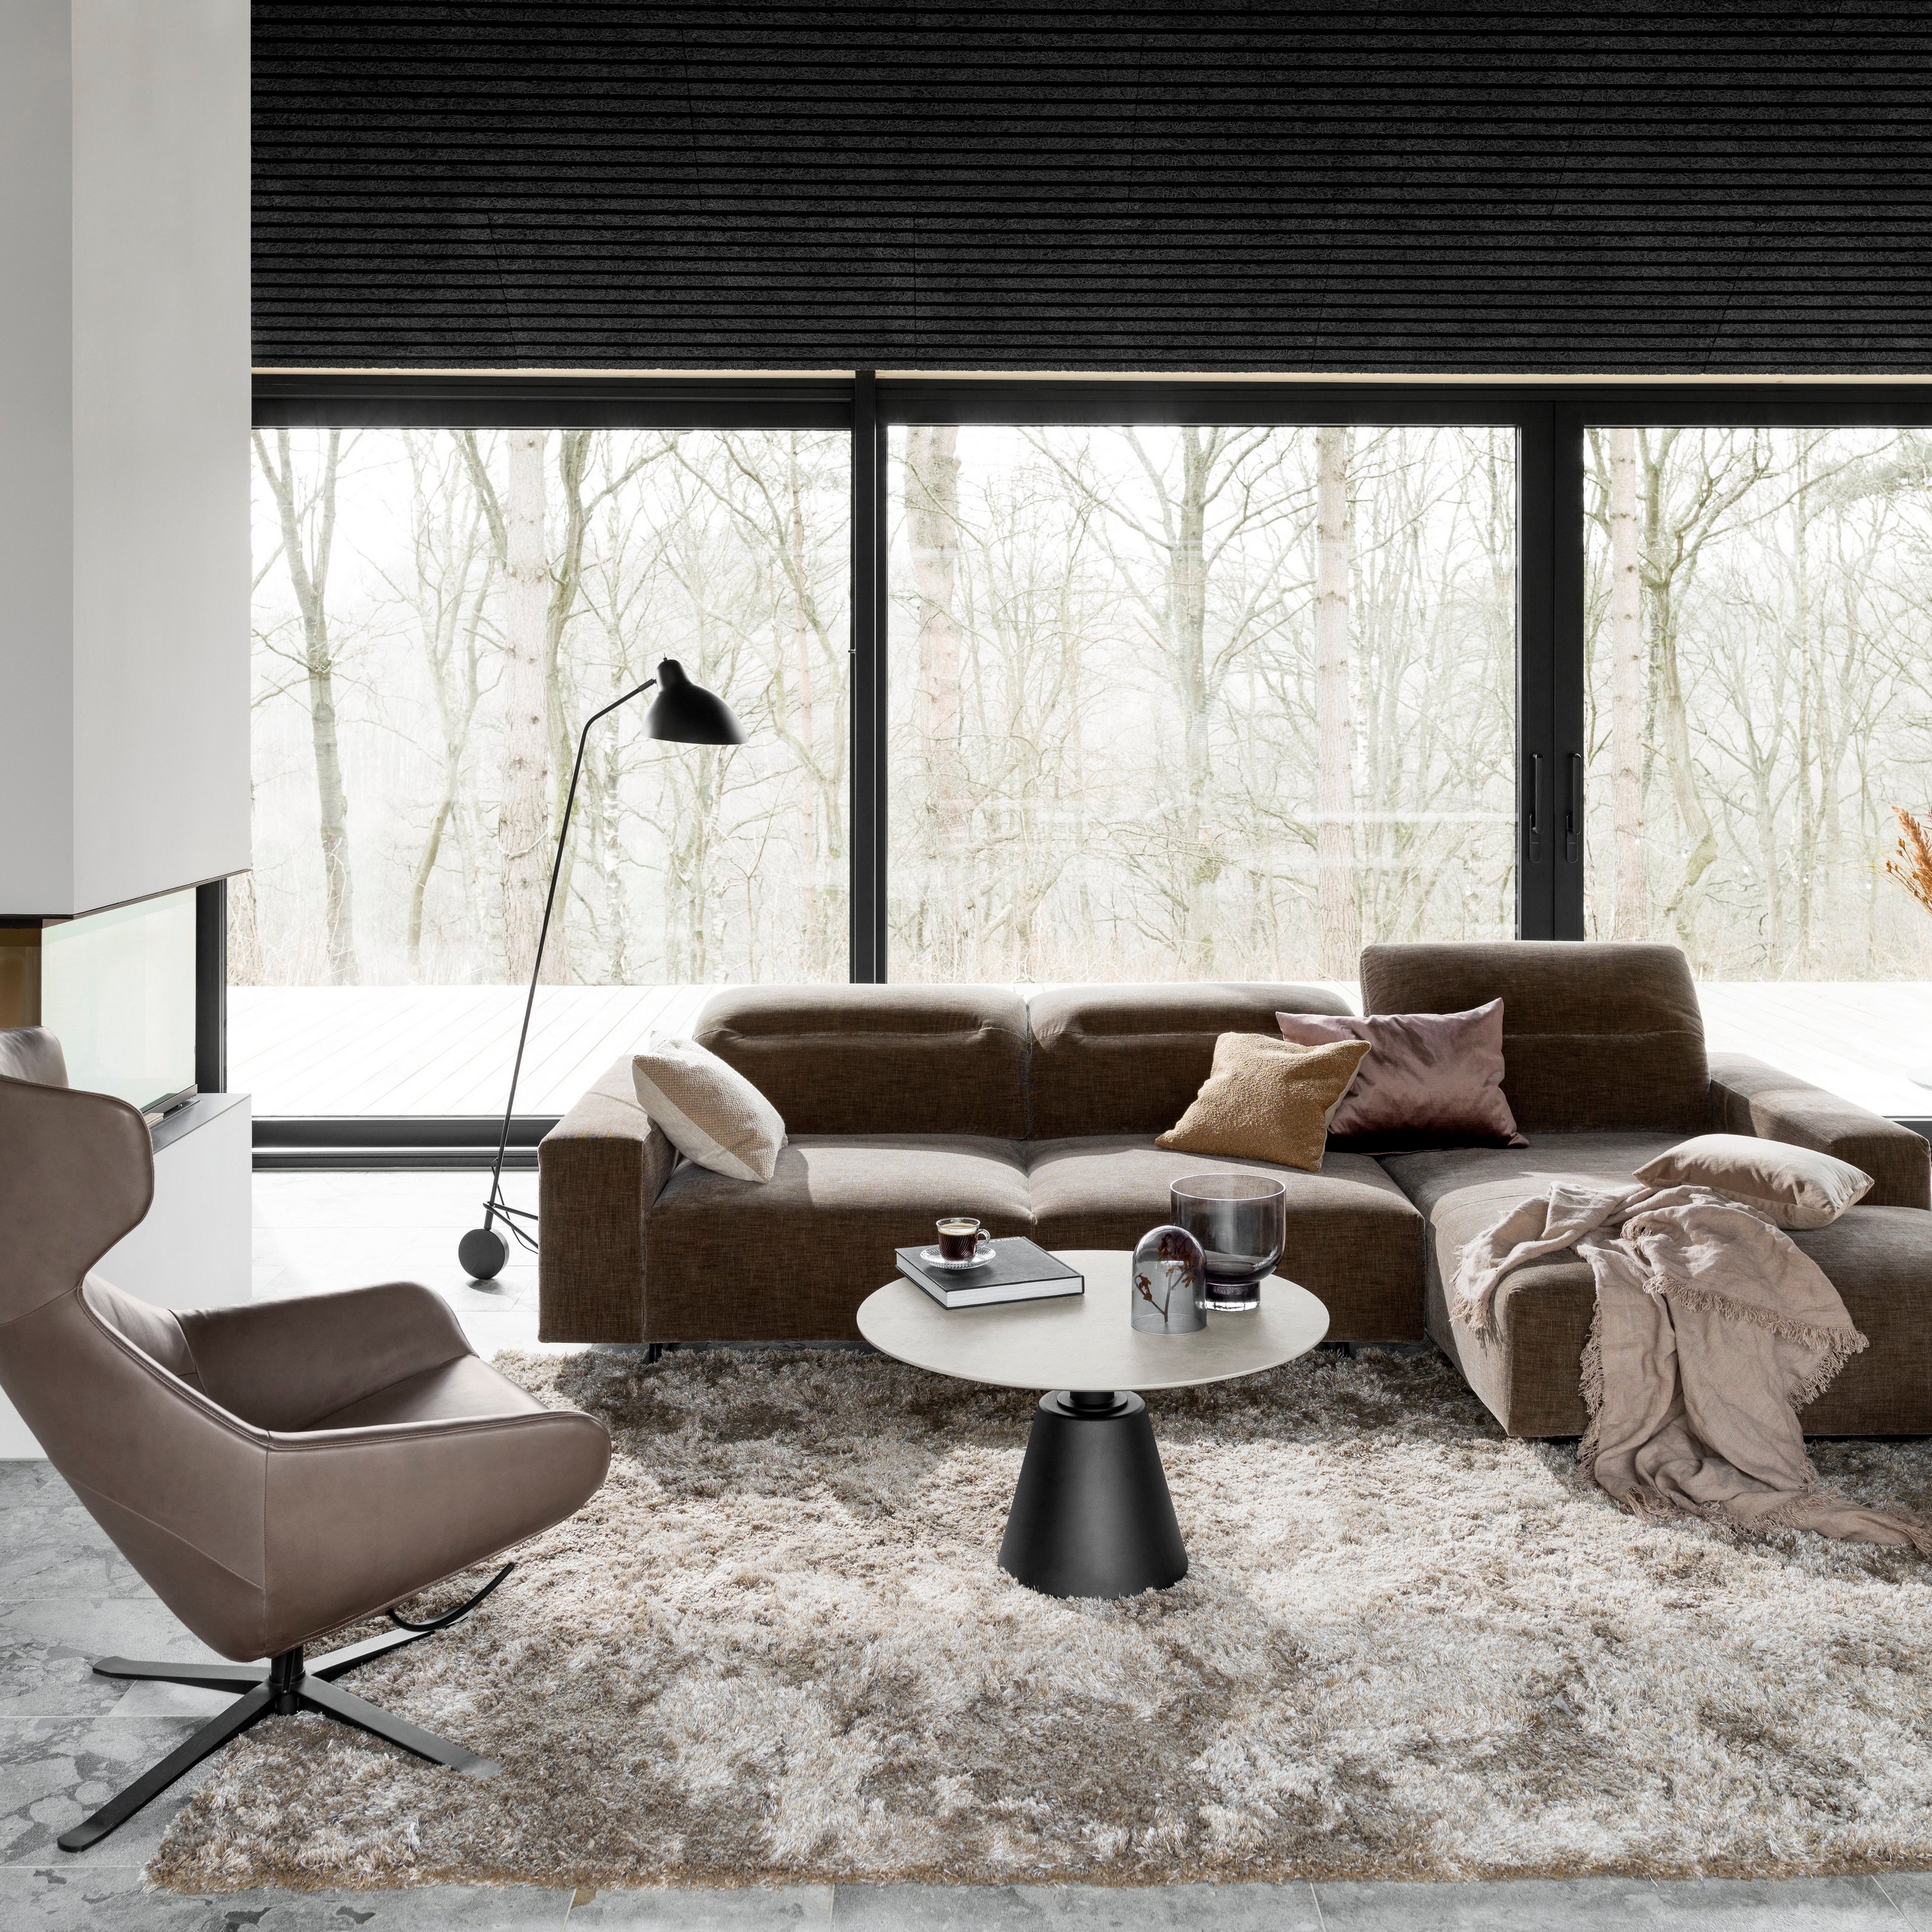 Modern living room with a brown sectional sofa, gray rug, and black floor lamp by a window